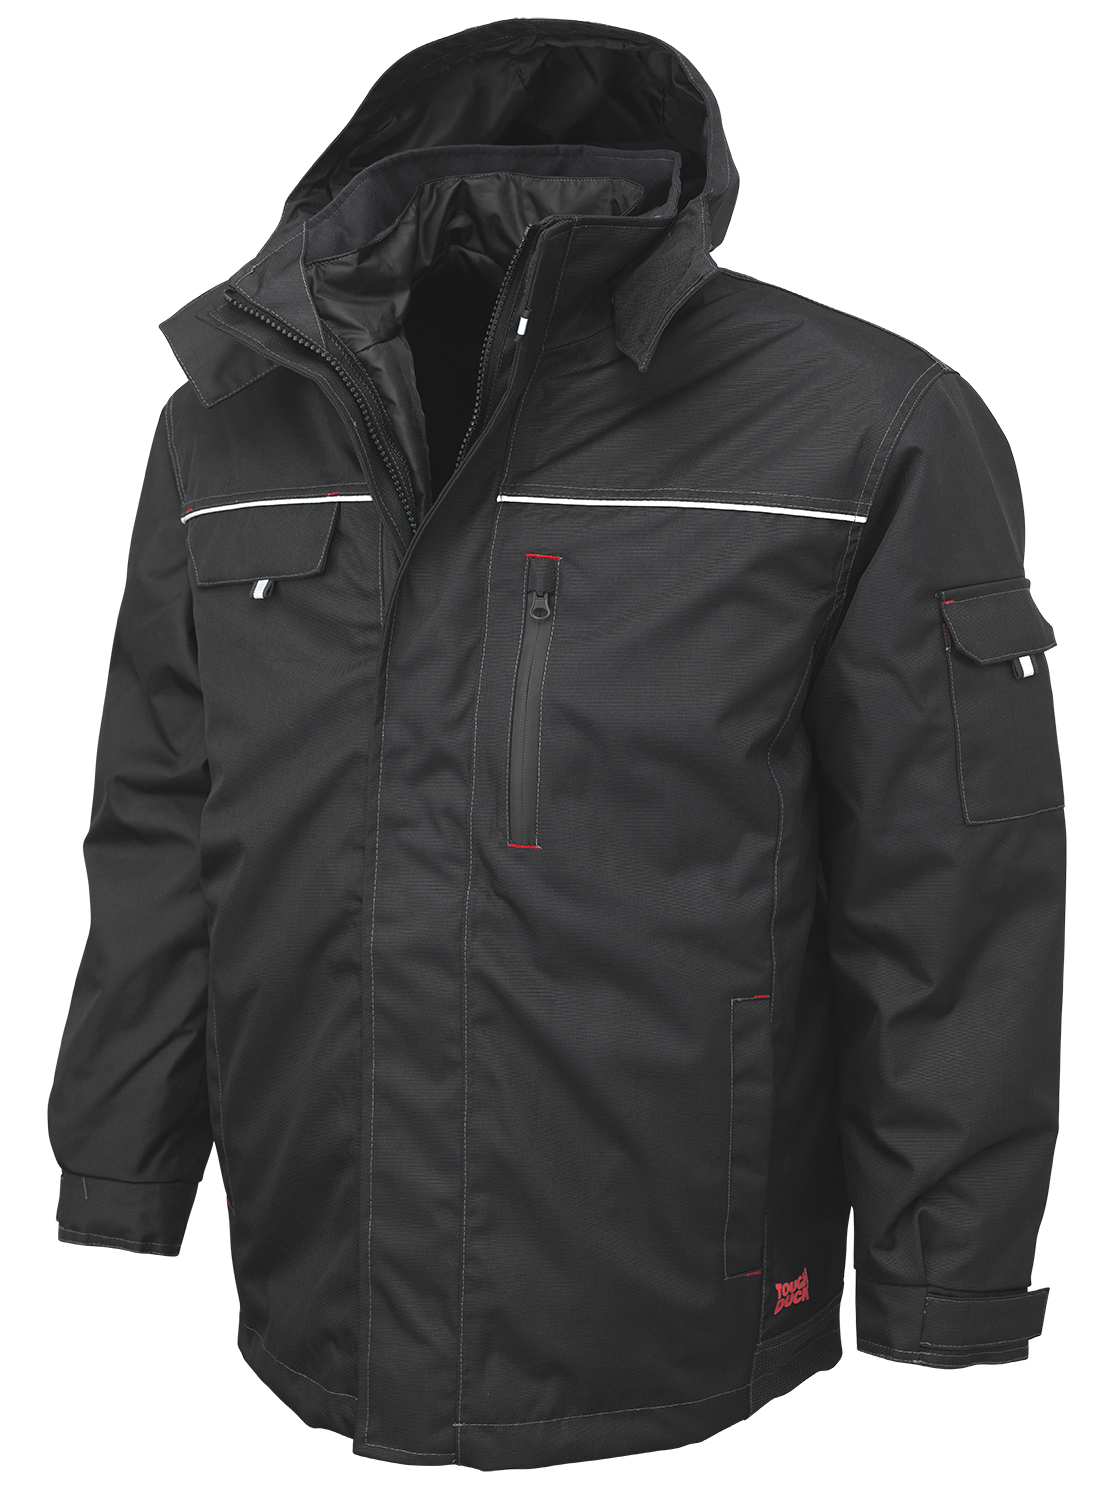 Tough Duck Men's Winter Work Jacket WJ24 150D Poly Oxford Insulated Wa